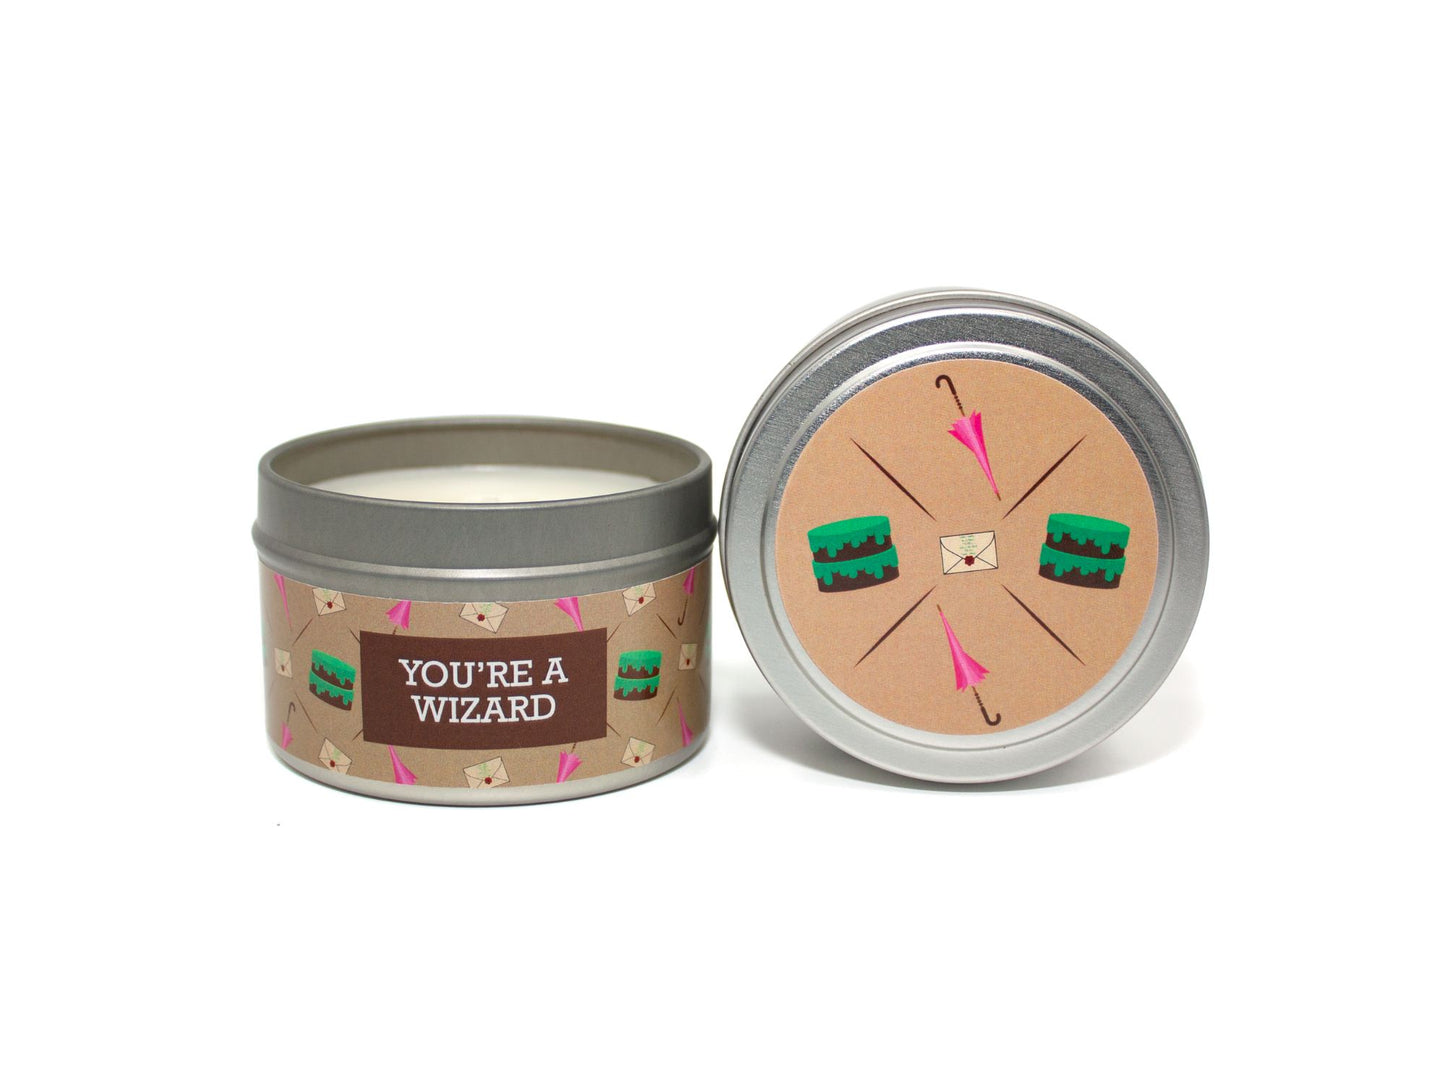 Onset & Rime chocolate cake scented candle called "You're a Wizard" in a 4 oz silver tin. The circular label on top is light brown with a pattern of pink umbrellas, white envelopes, and chocolate cakes with green icing. The text on the front label is "You're a Wizard - Chocolate Fudge Cake, Buttercream Frosting".